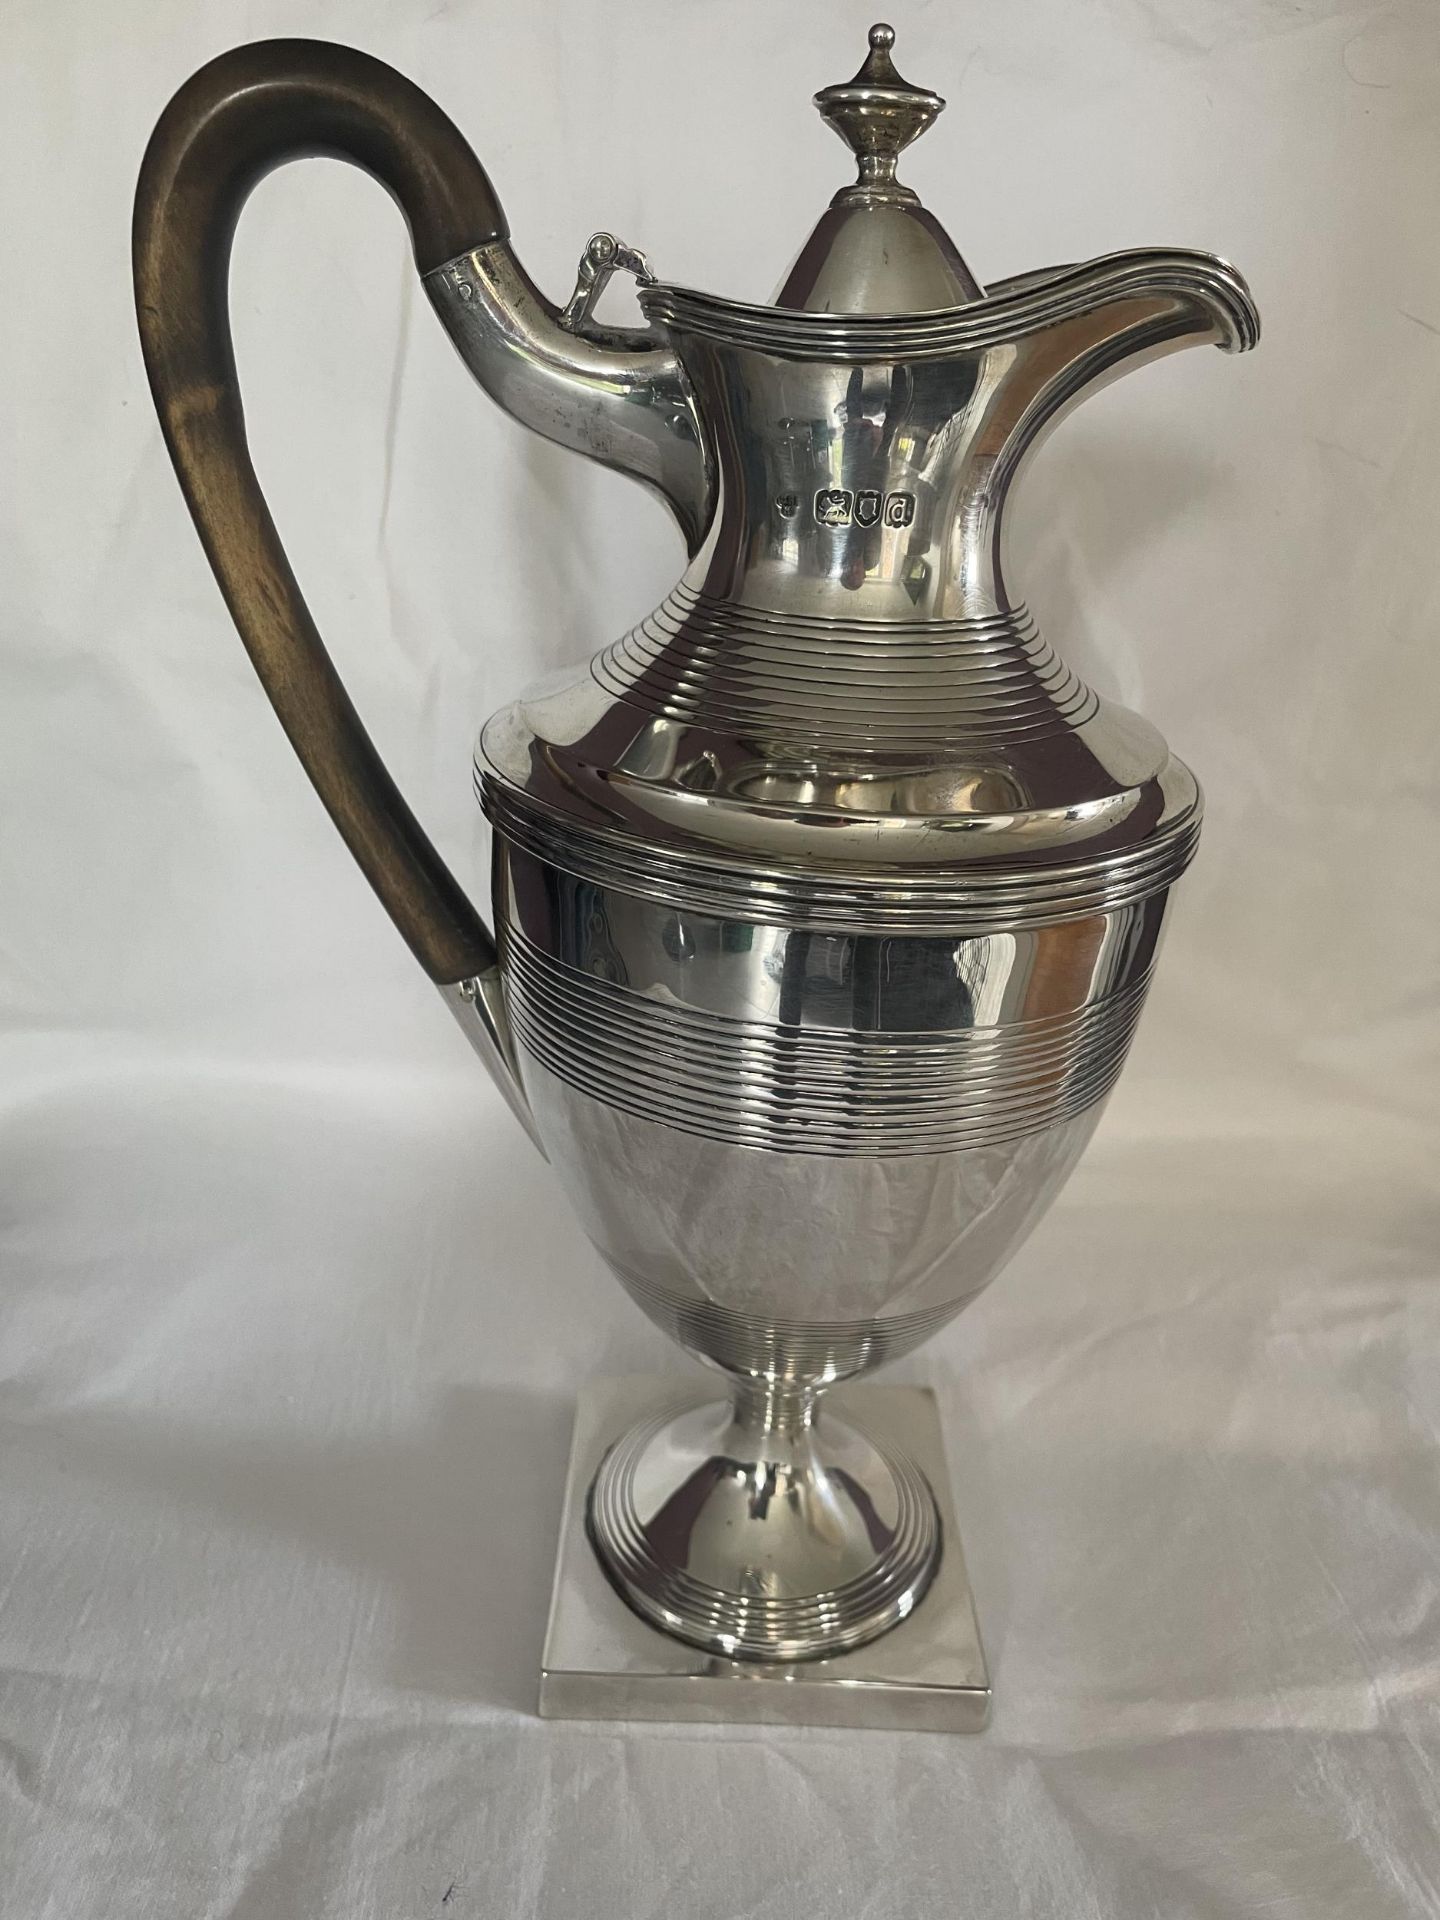 A HALLMARKED 1819 LONDON SILVER CLARET JUG WITH FRUIT WOOD HANDLE, MAKER C S HARRIS AND SONS LTD -